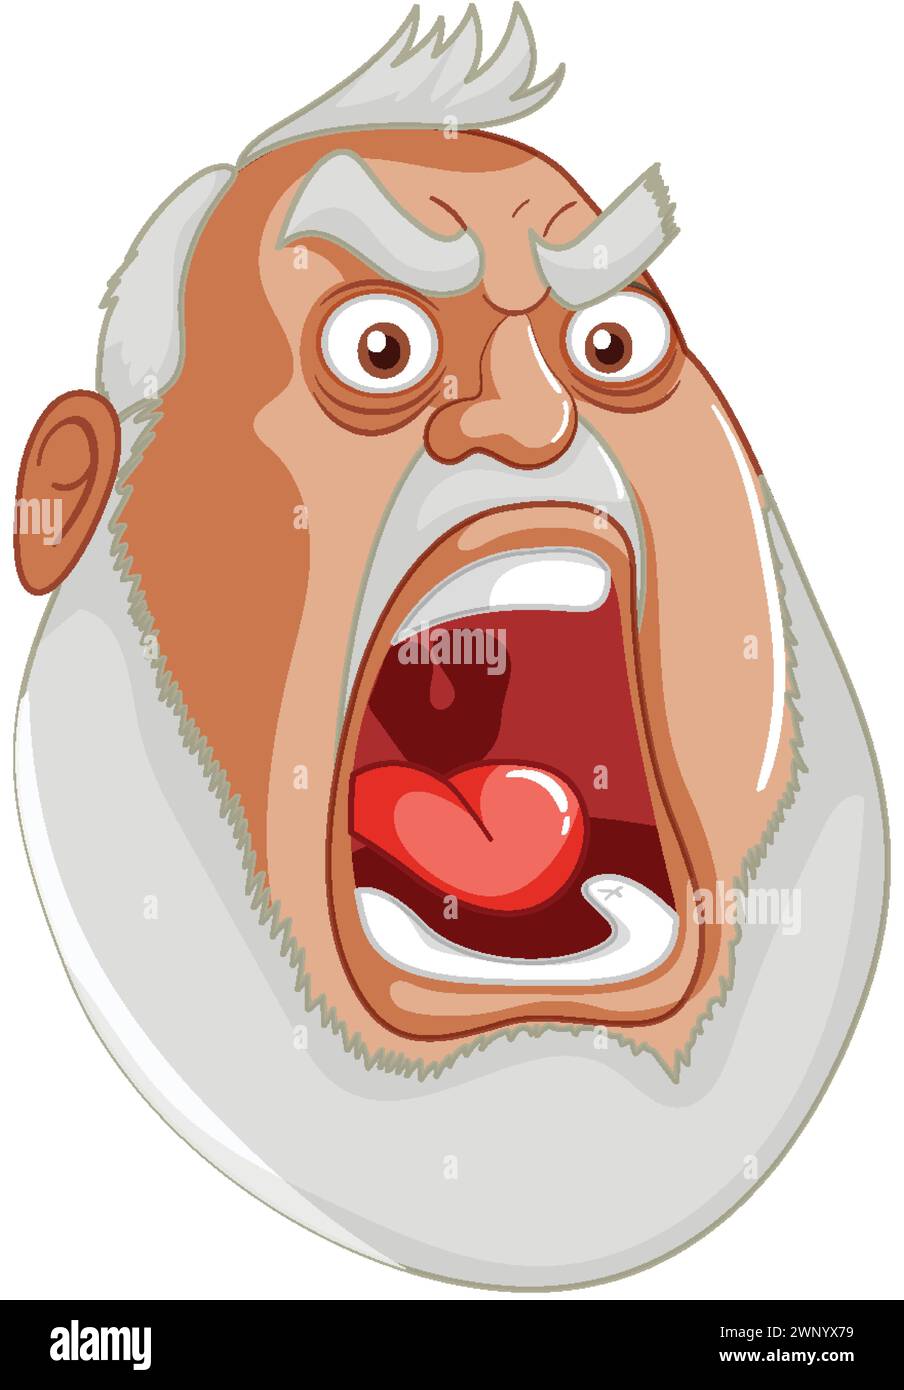 Vector illustration of a man yelling angrily. Stock Vector